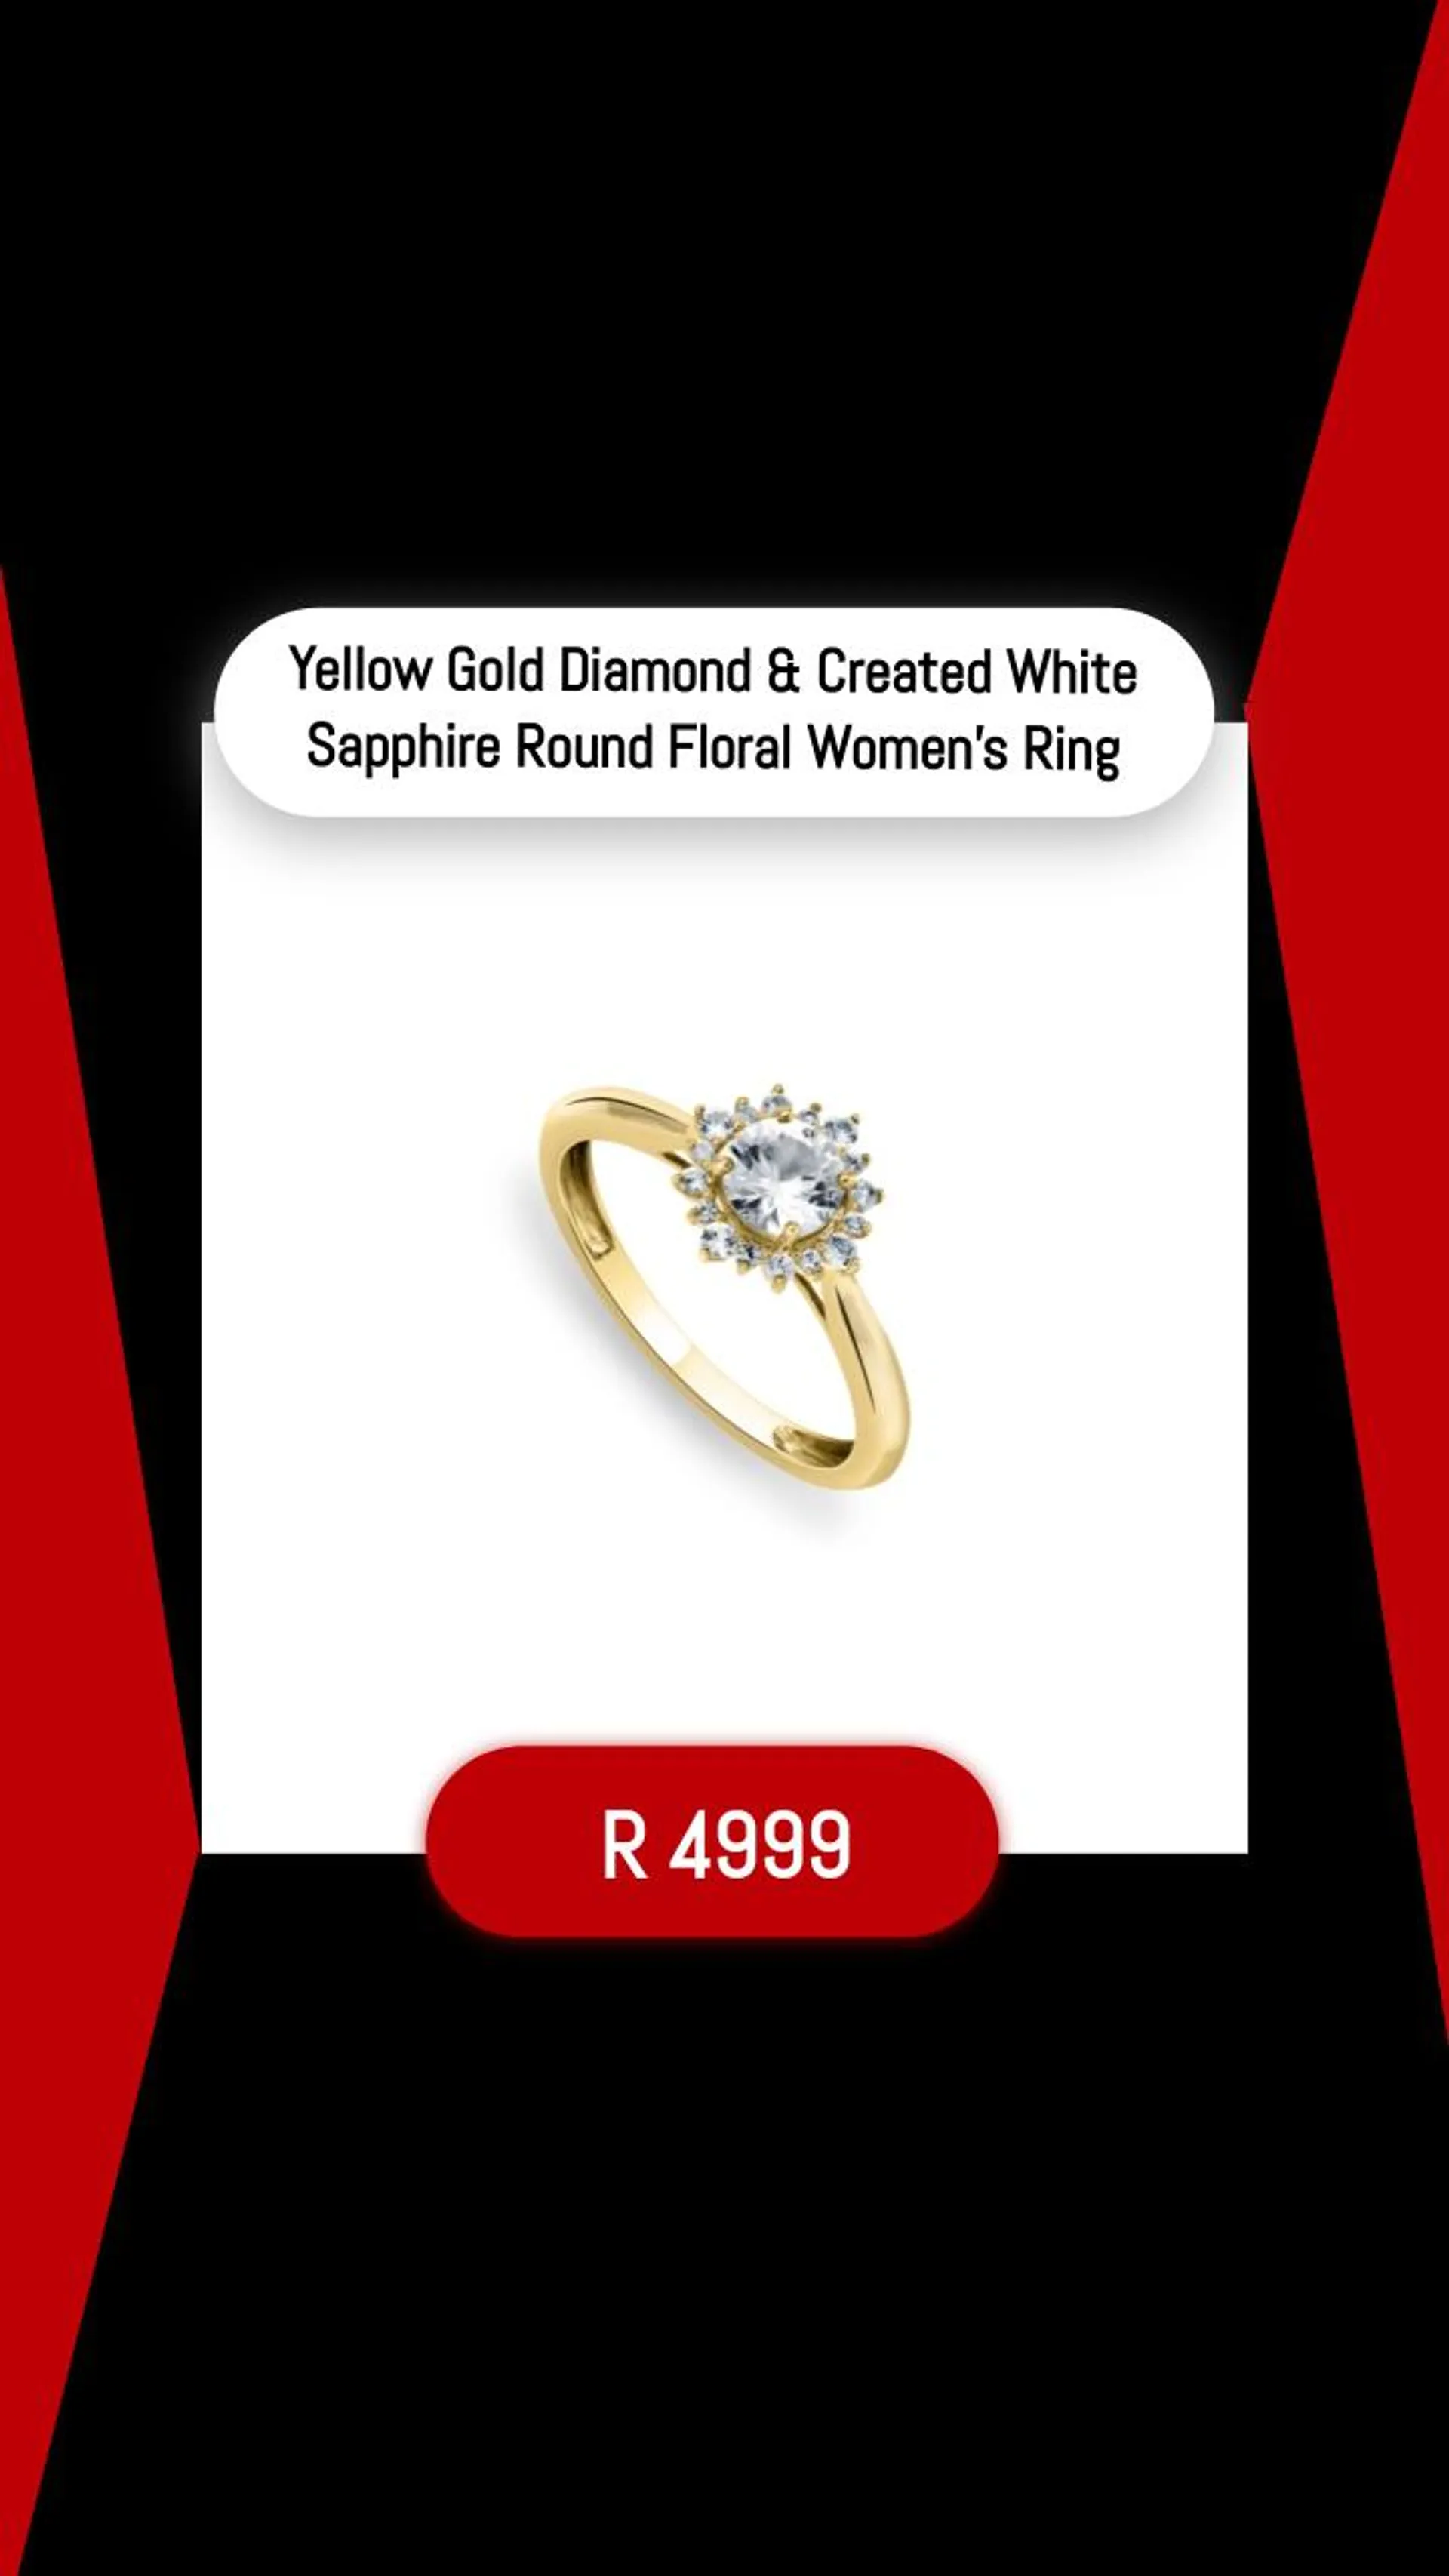 Yellow Gold Diamond & Created White Sapphire Round Floral Women’s Ring